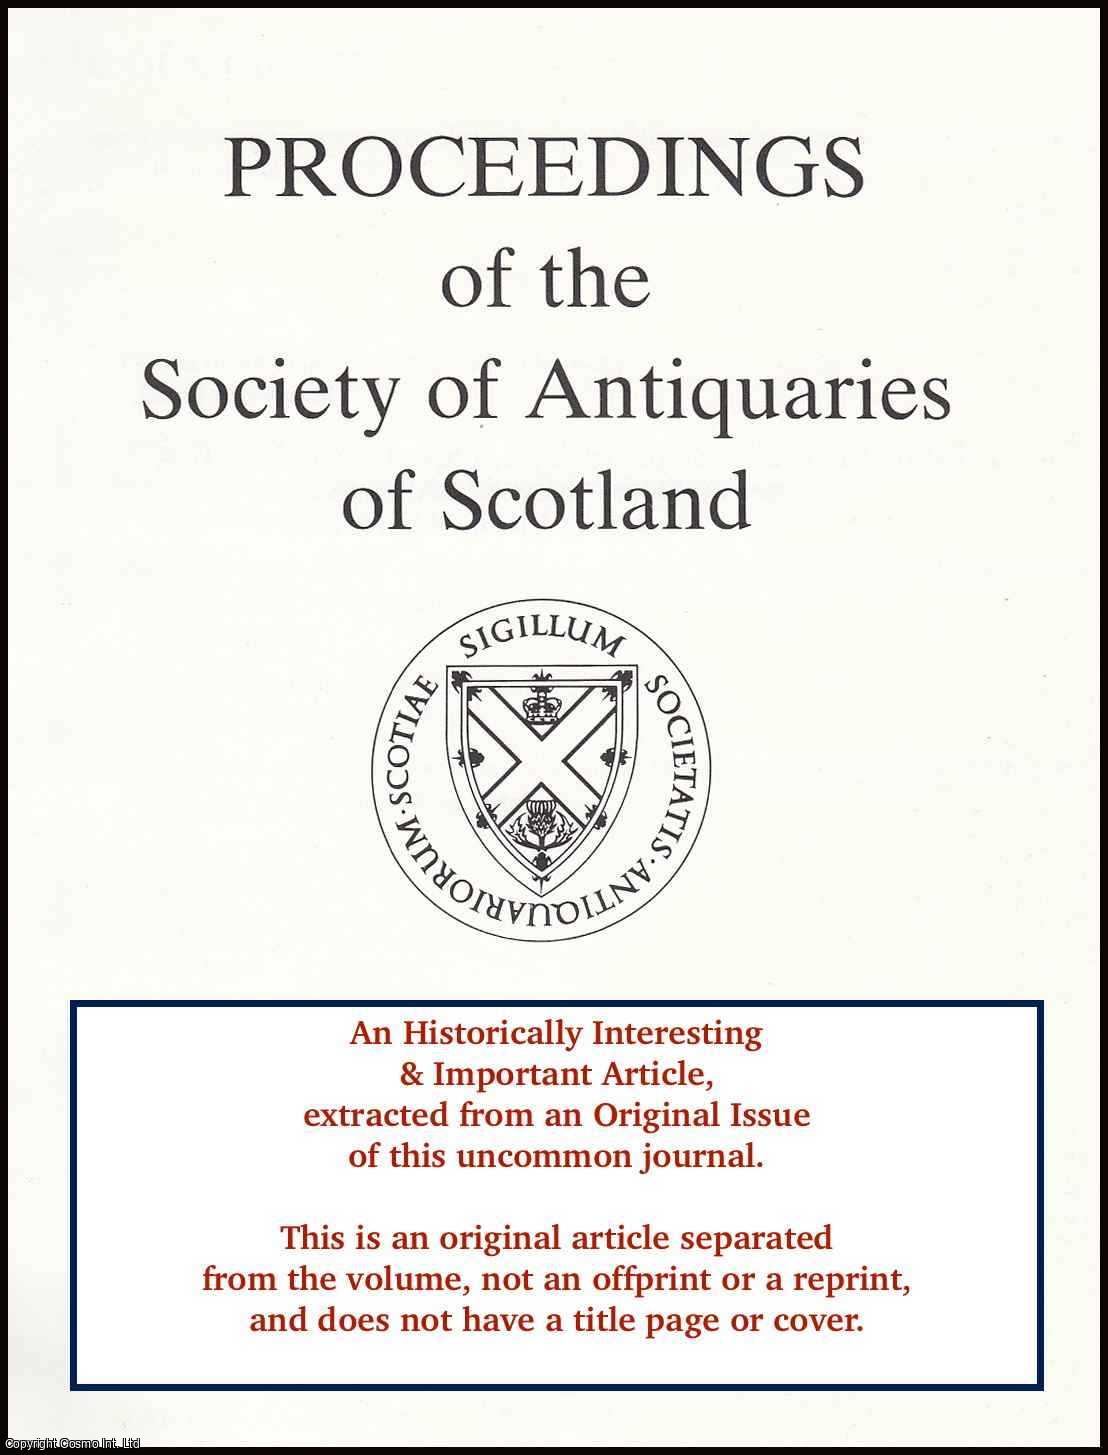 Elizabeth F. Wright - Thomas Hadden: Architectural Metalworker. An original article from the Proceedings of the Society of Antiquaries of Scotland, 1991.